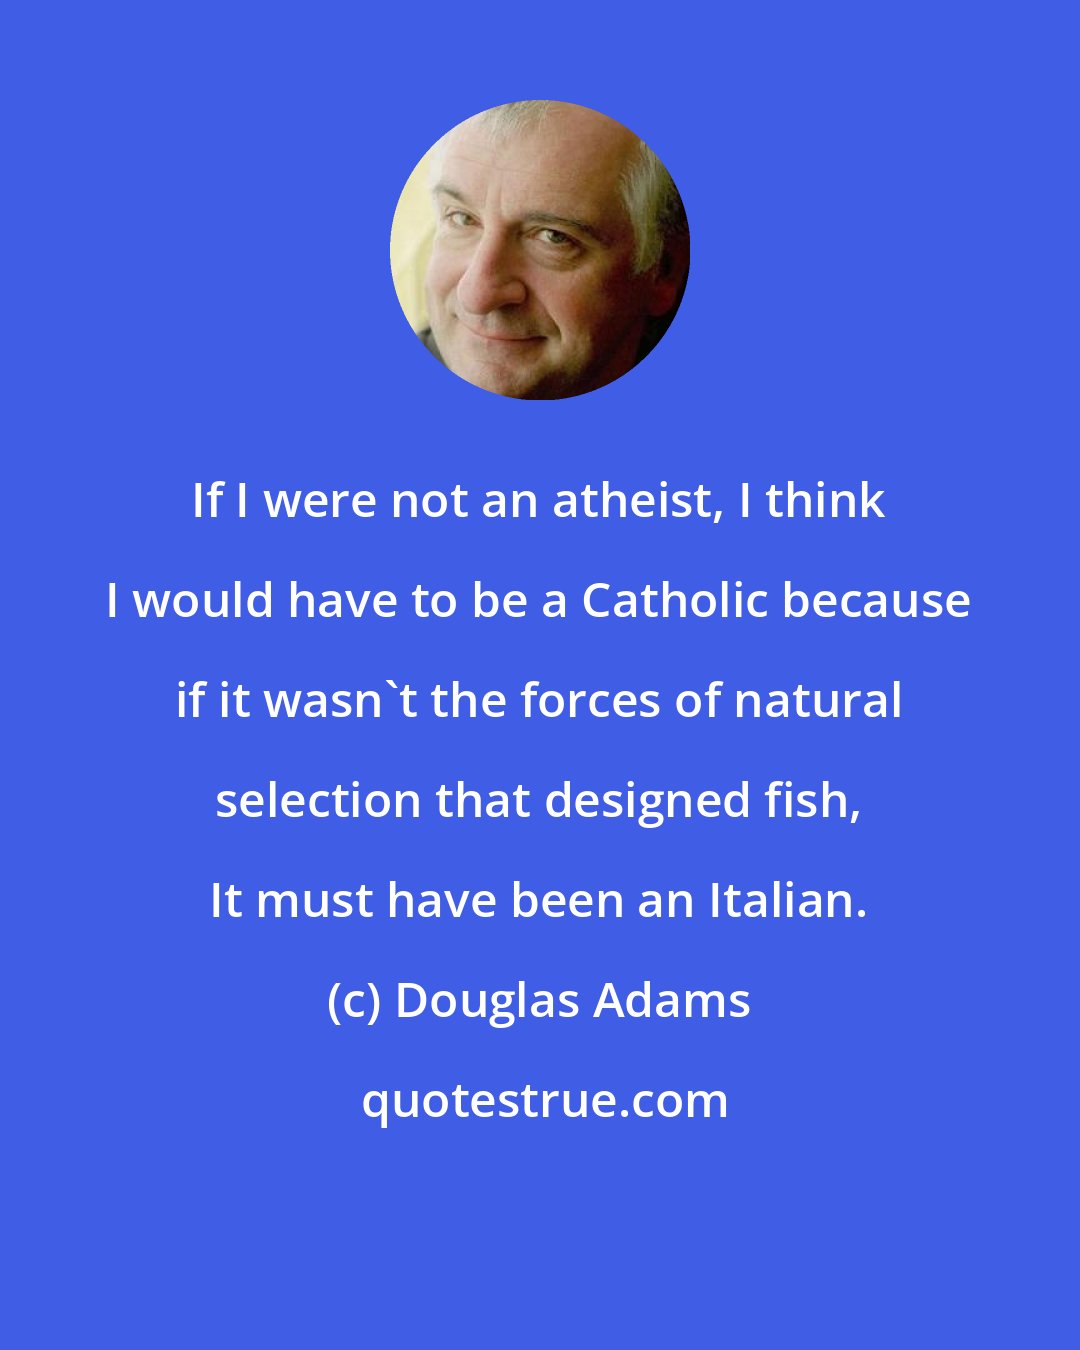 Douglas Adams: If I were not an atheist, I think I would have to be a Catholic because if it wasn't the forces of natural selection that designed fish, It must have been an Italian.